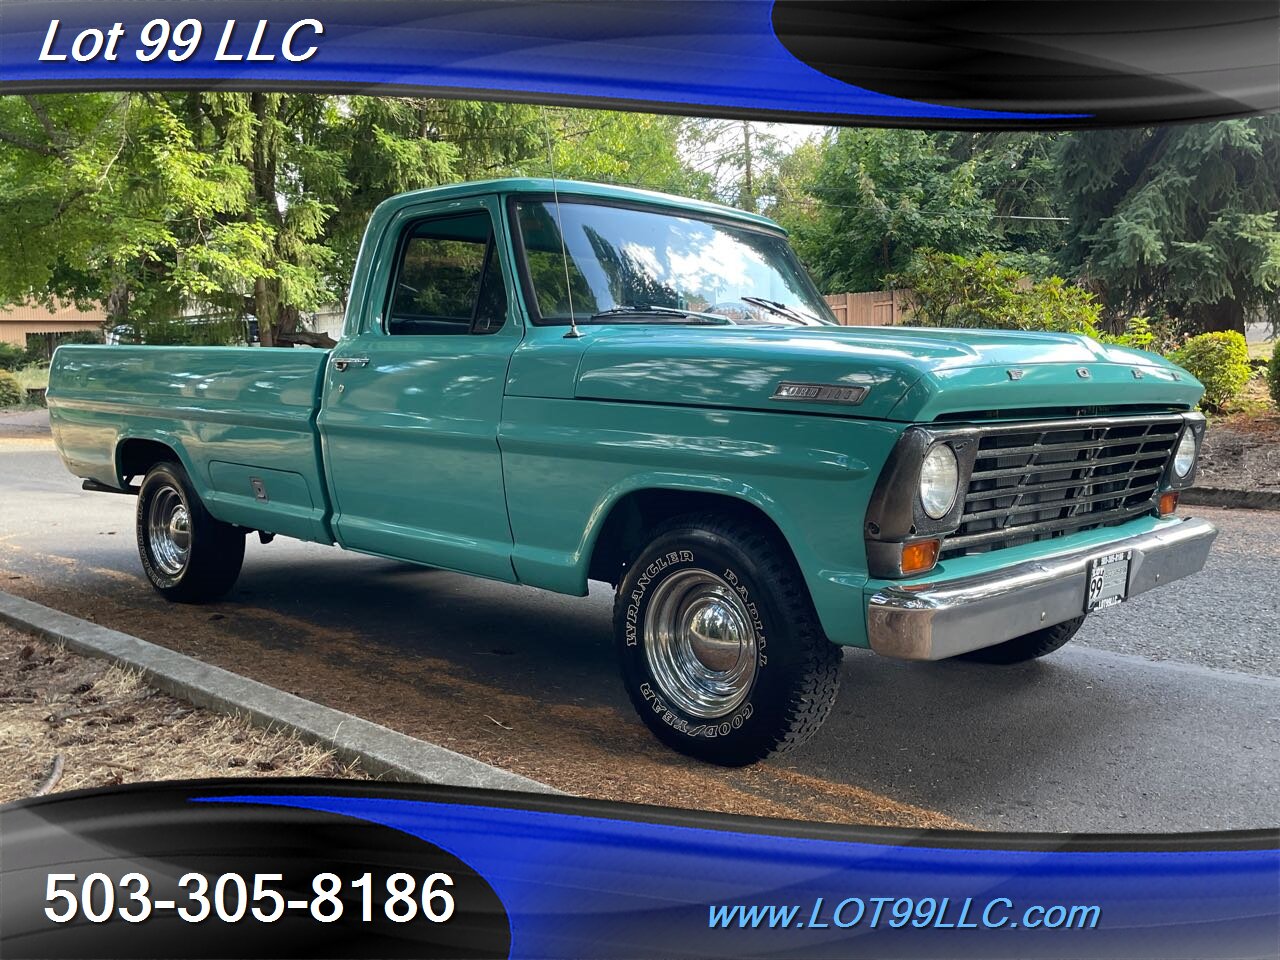 1967 Ford F-100 302 V8  Long Bed No Rust Solid Truck   - Photo 4 - Milwaukie, OR 97267